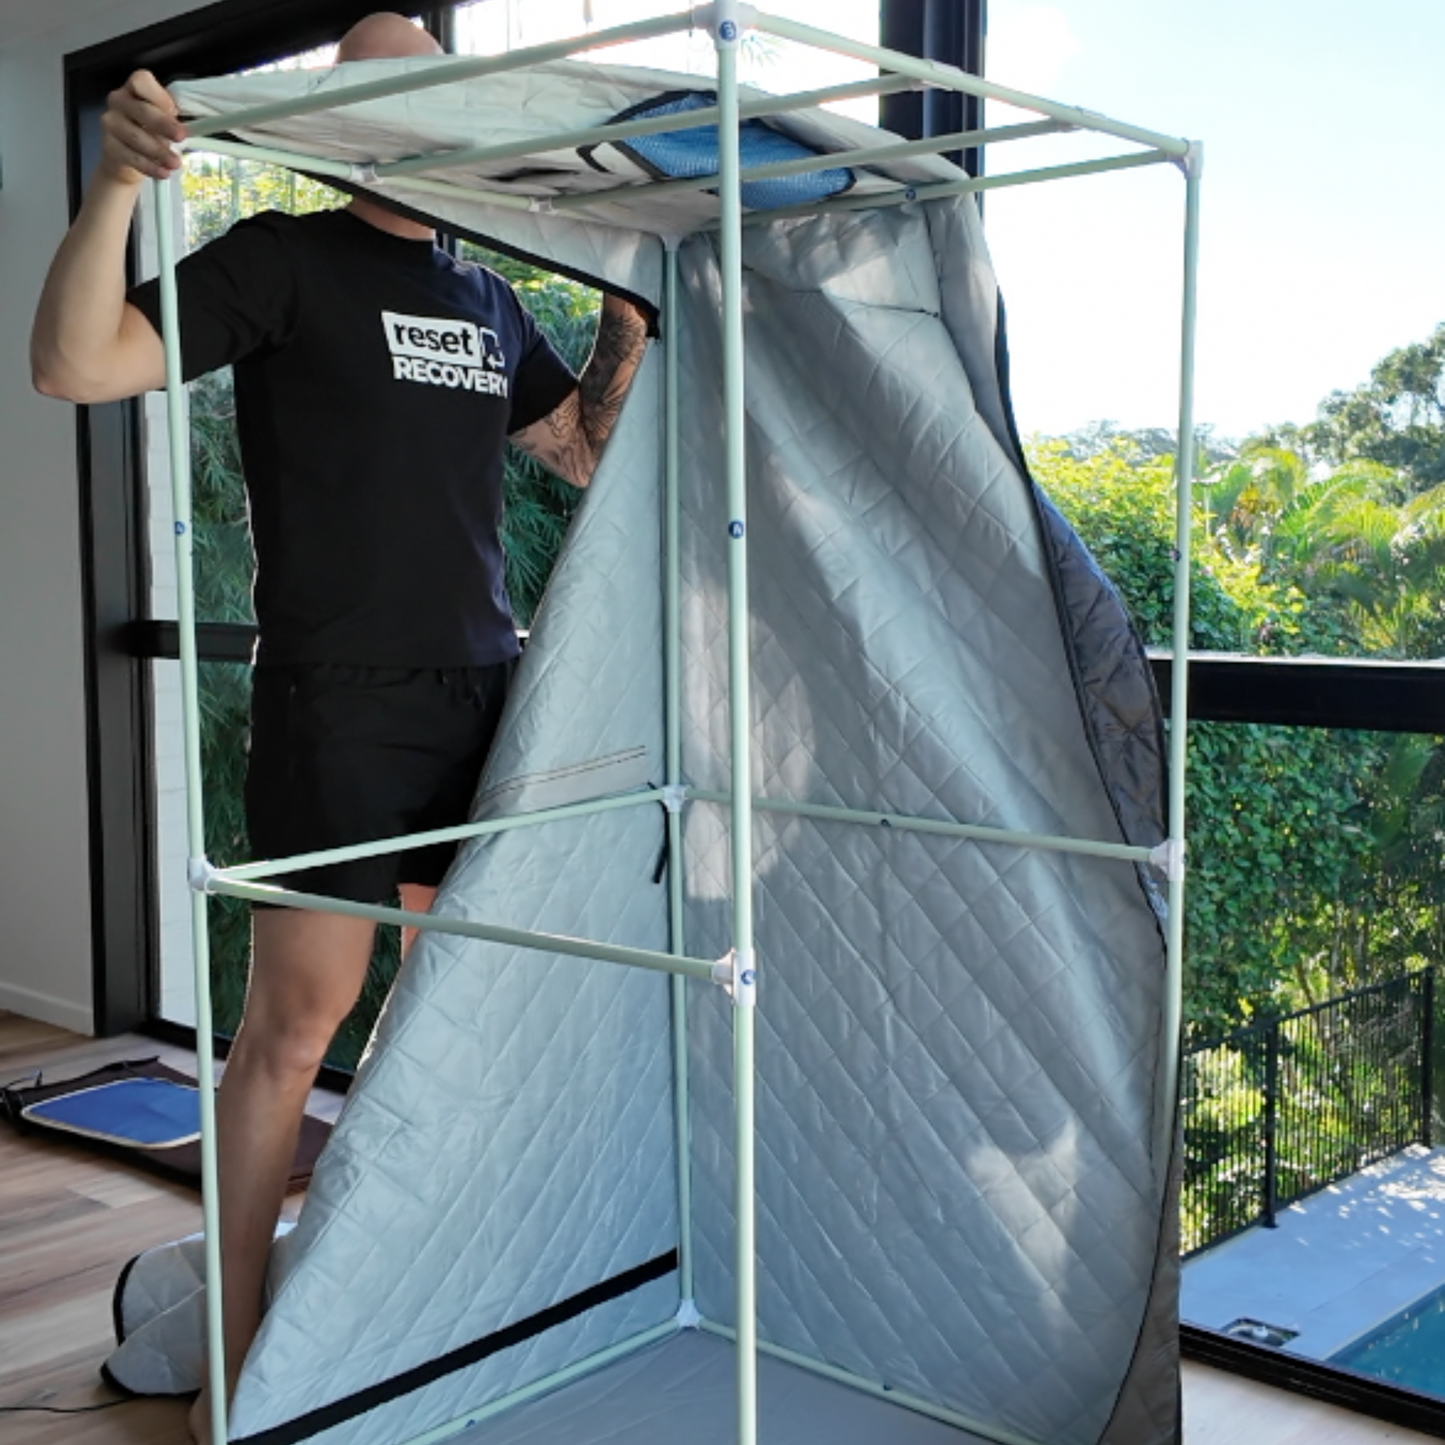 Portable Infrared Sauna - Reset Recovery